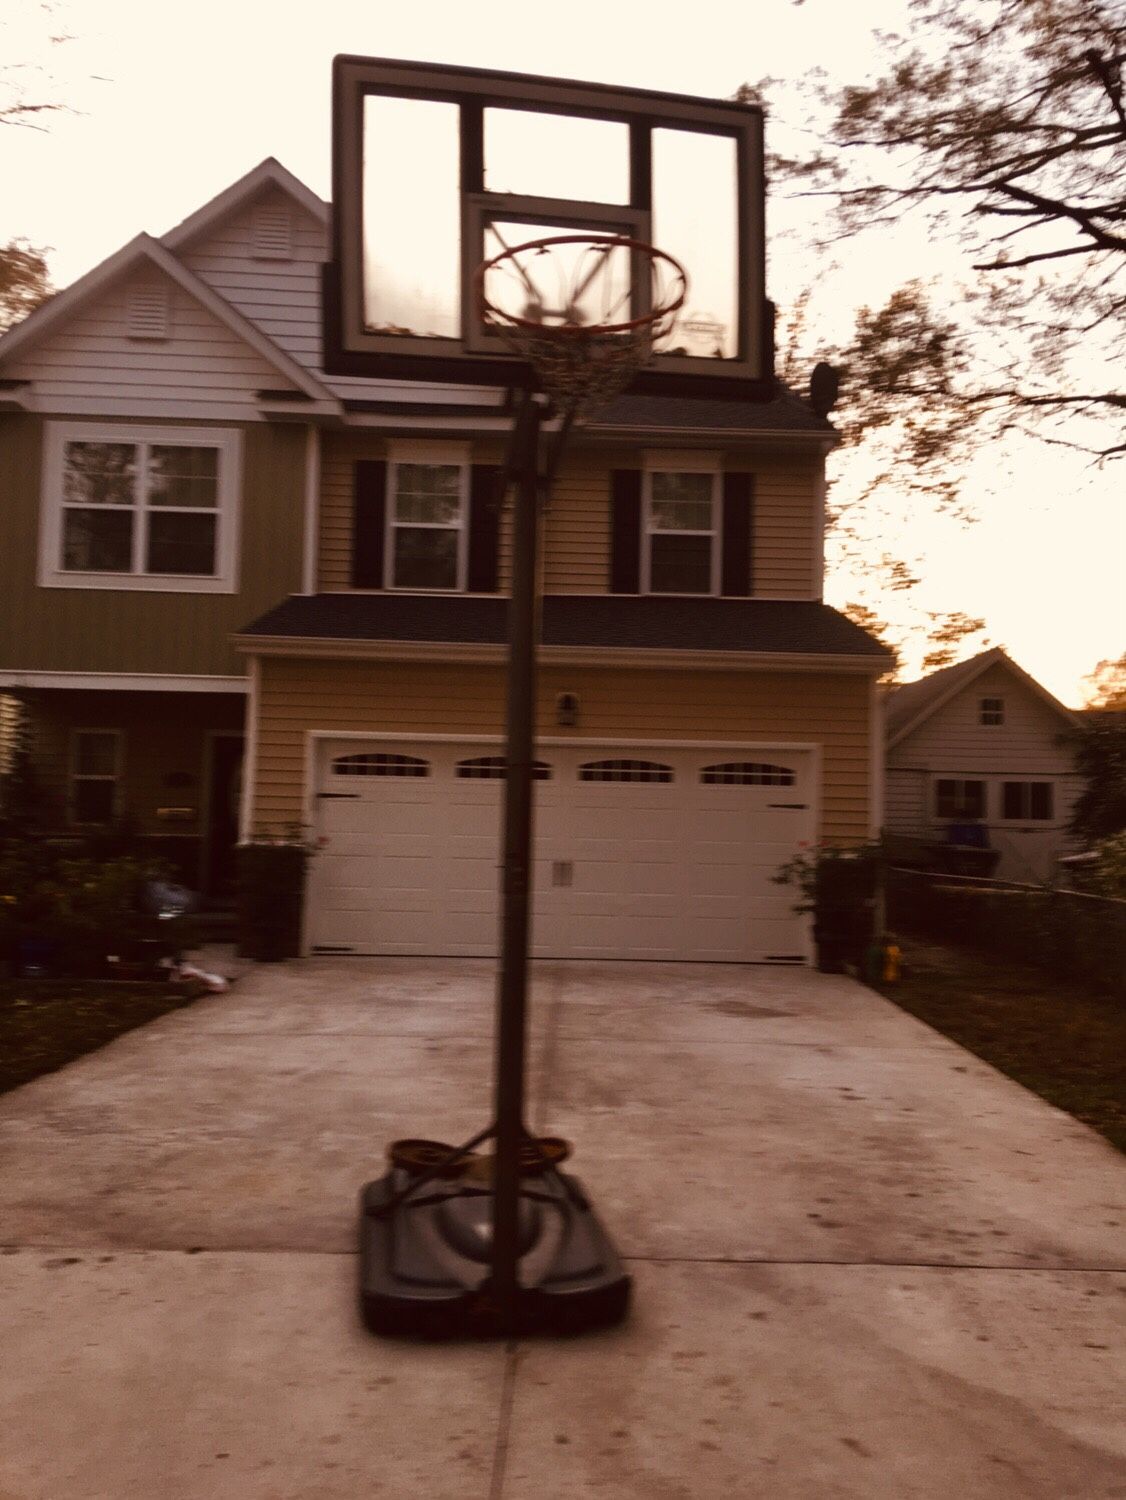 I have basketball hoop in good condition